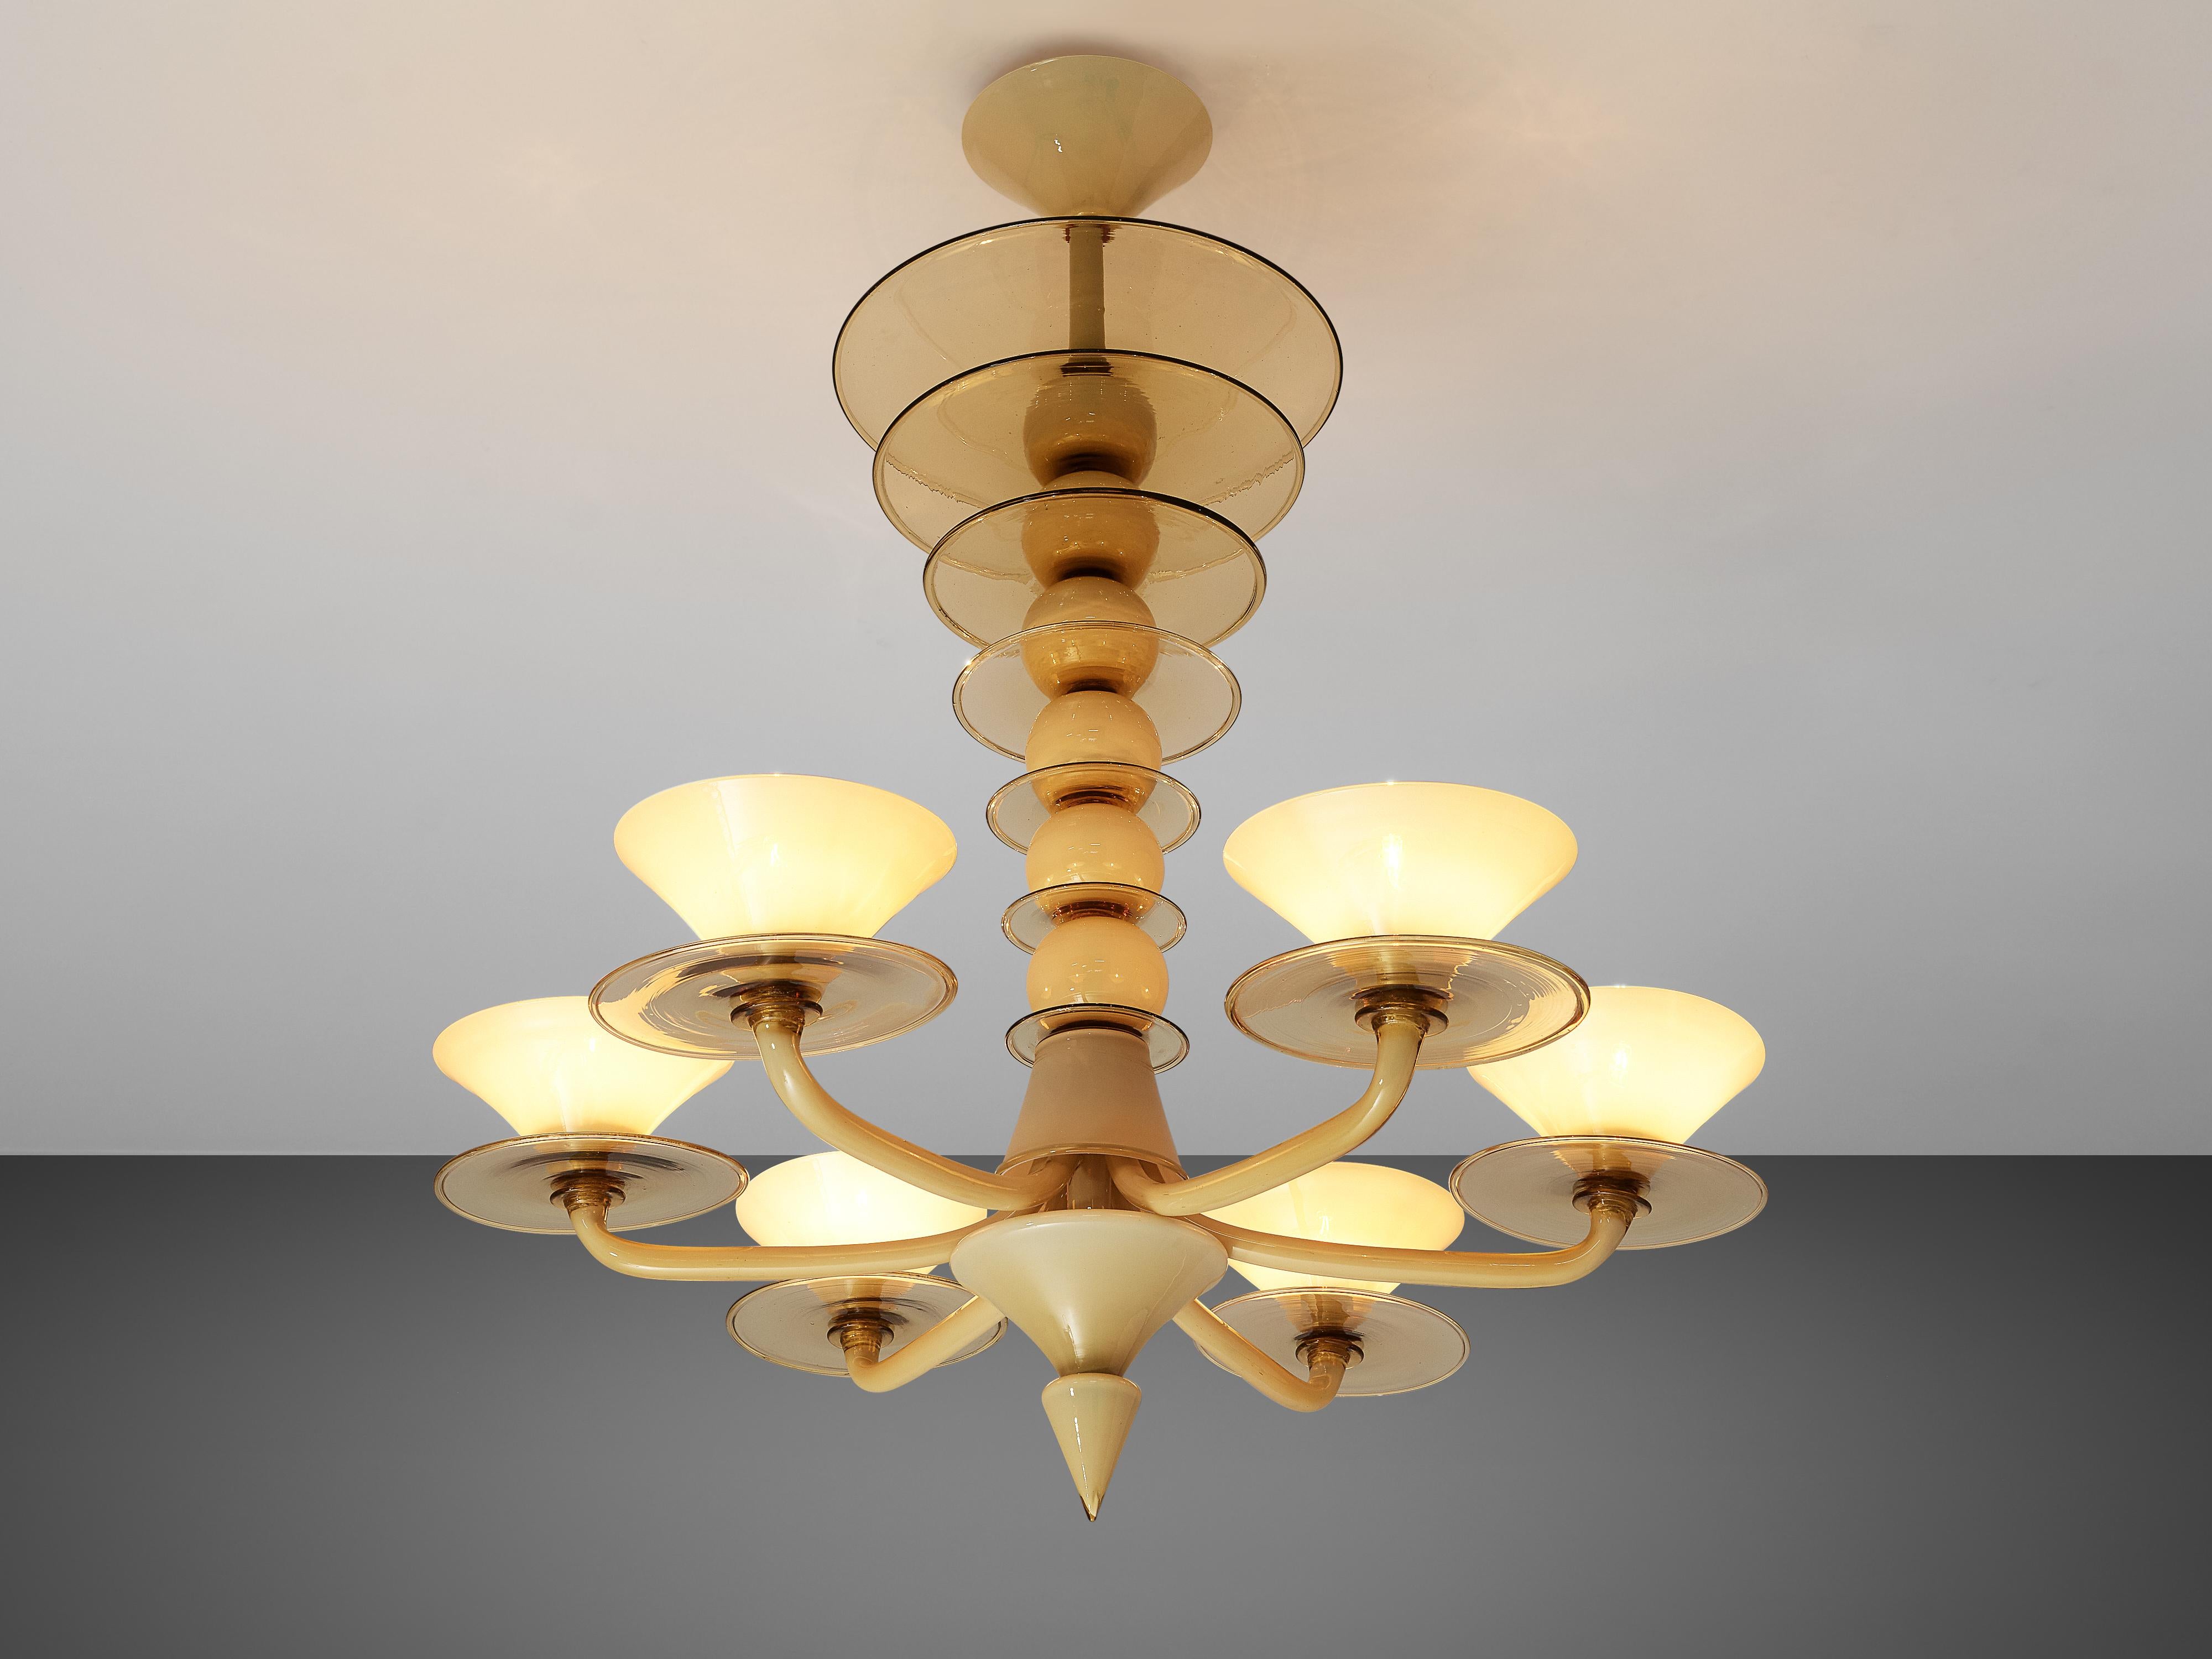 Chandelier, glass, metal, Italy, 1960s

This playful yet elegant chandelier convinces the viewer with beautiful color shades of yellow and beige. On a conical fixation are hanging six balls separated with plates in smoked glass. The plates get